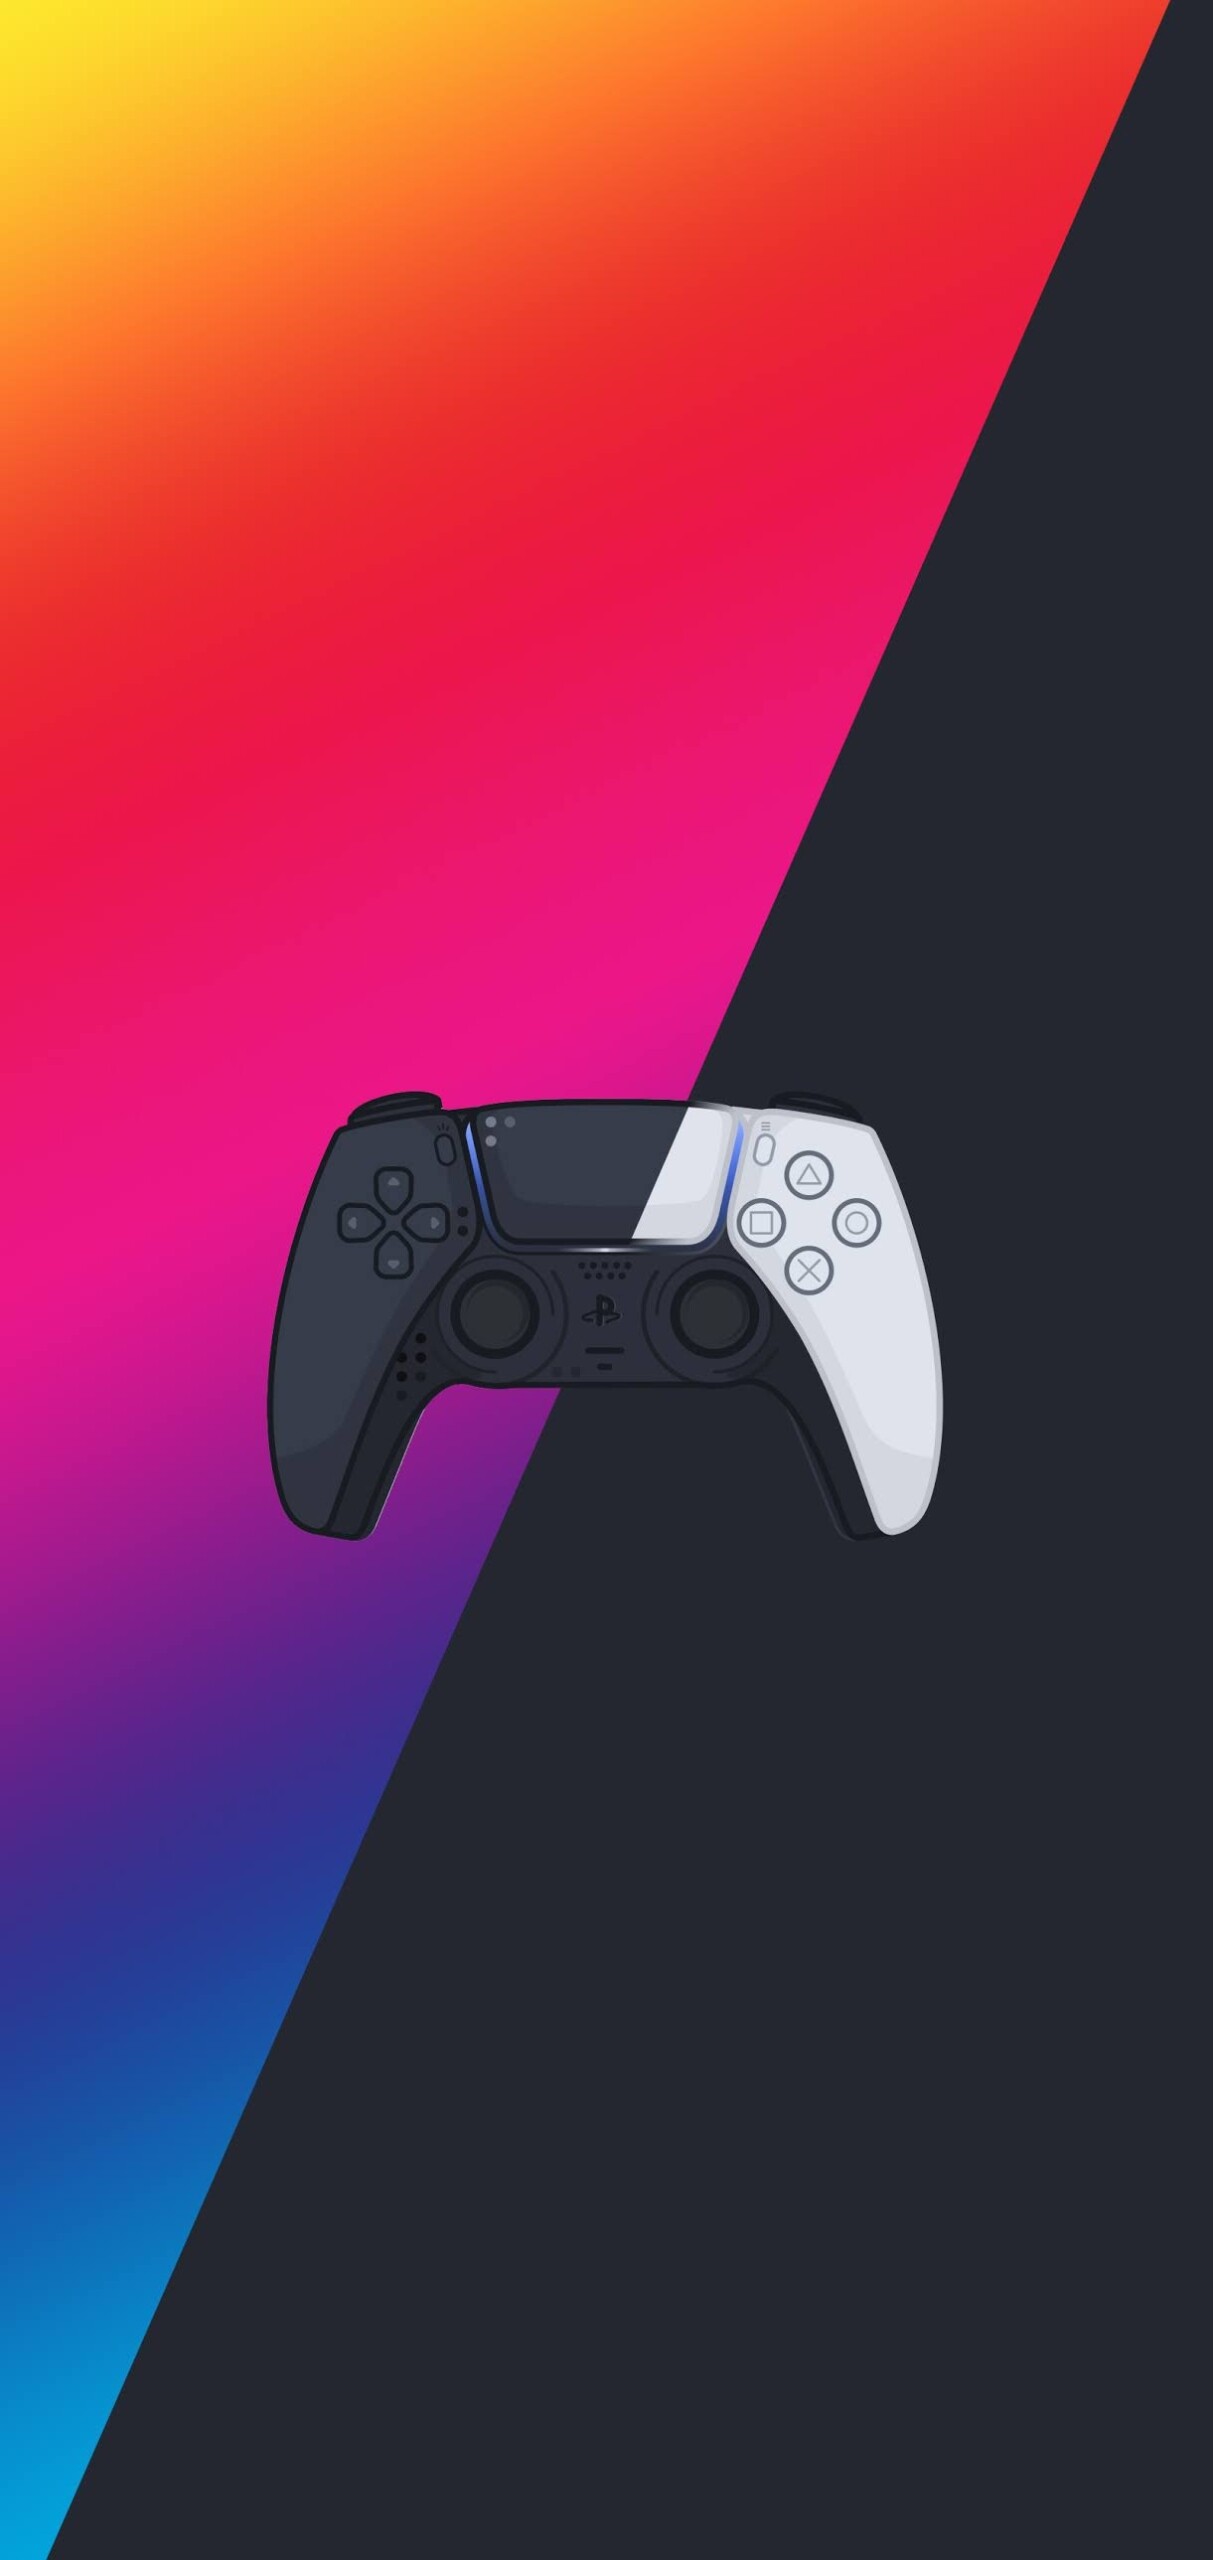 Geek: Console gaming, Sony PlayStation 5, An individual who obsesses over tech and video games. 1220x2560 HD Wallpaper.